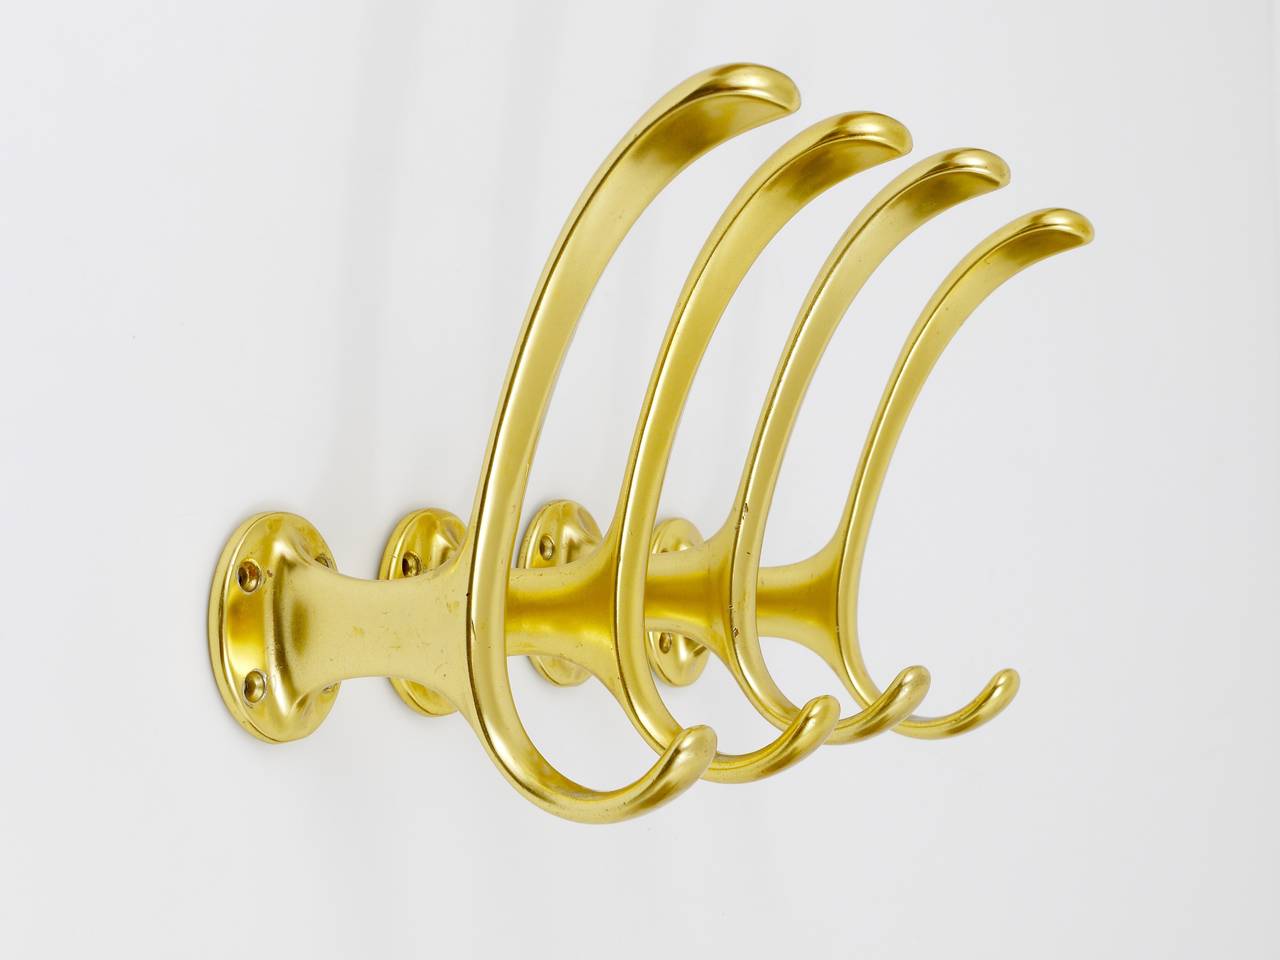 Anodized Set of Four Golden Midcentury Wall Hooks, Austria, Vienna, 1950s For Sale